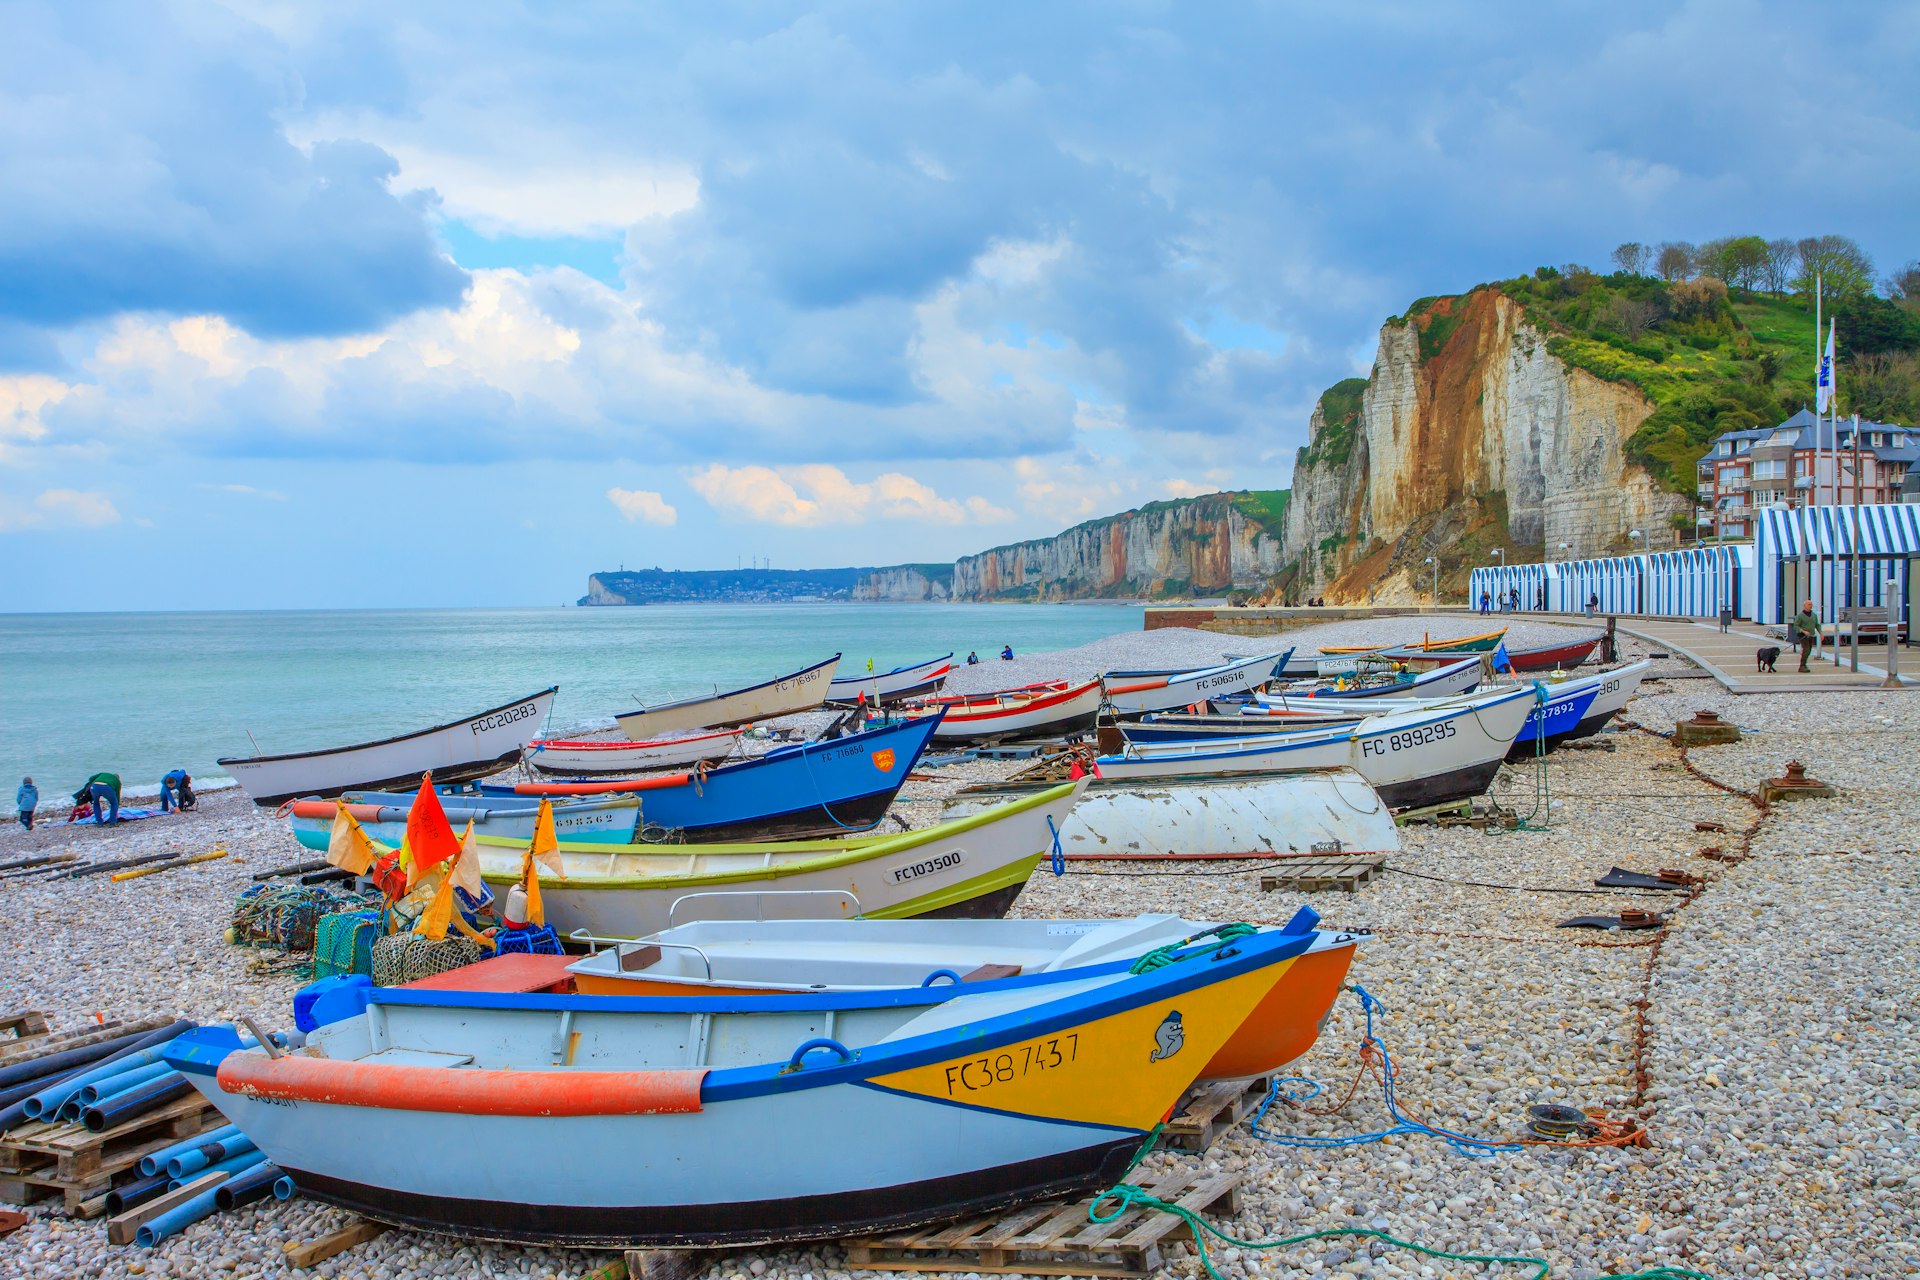 Colorful boats on the beach in Yport, Normandy, France